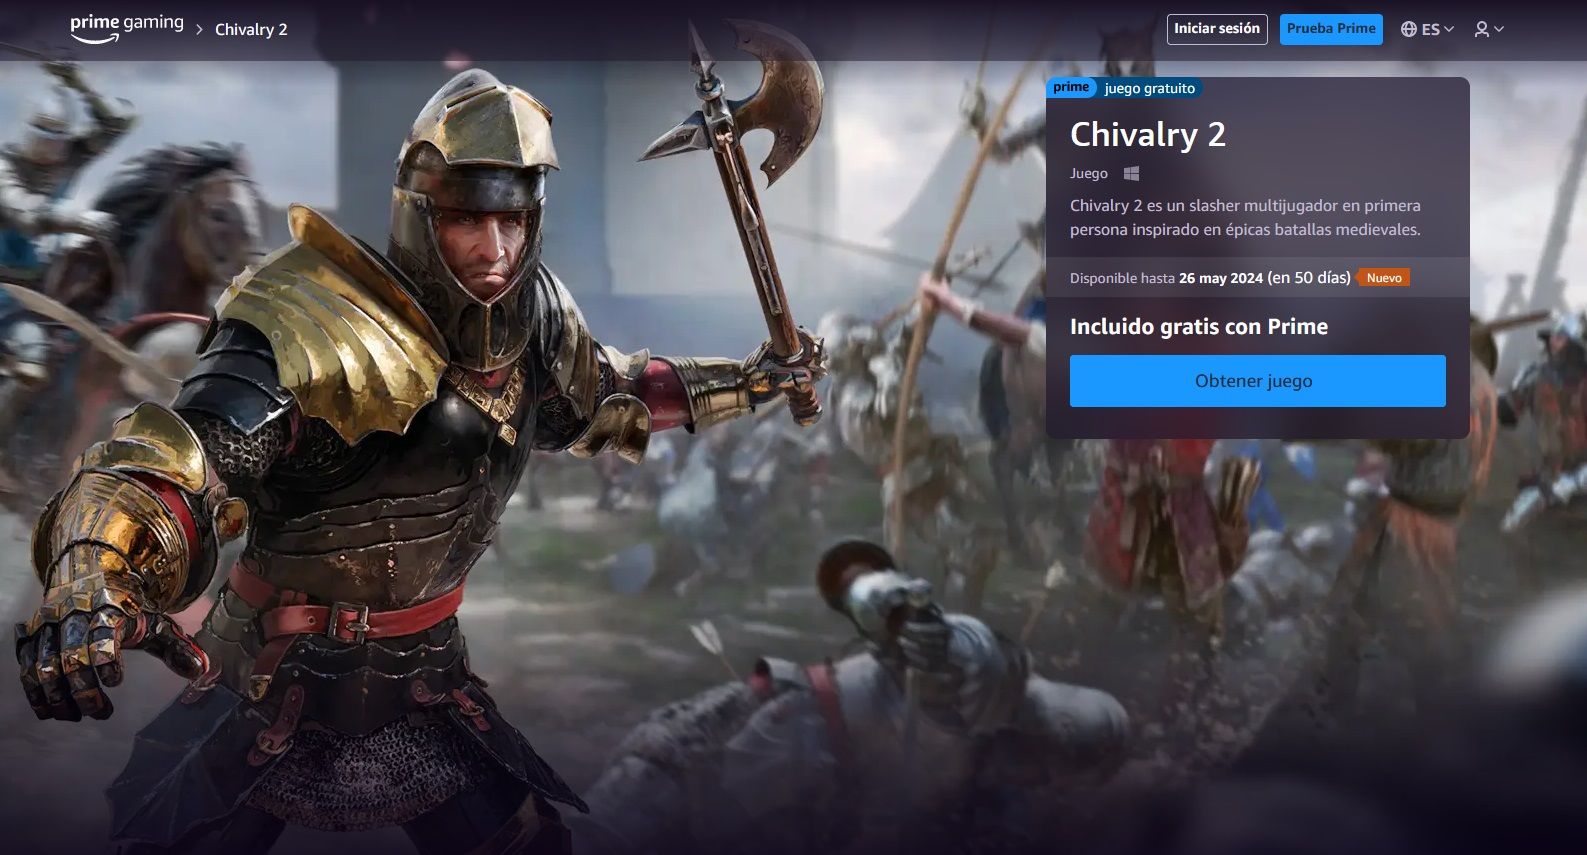 chivalry 2 prime gaming